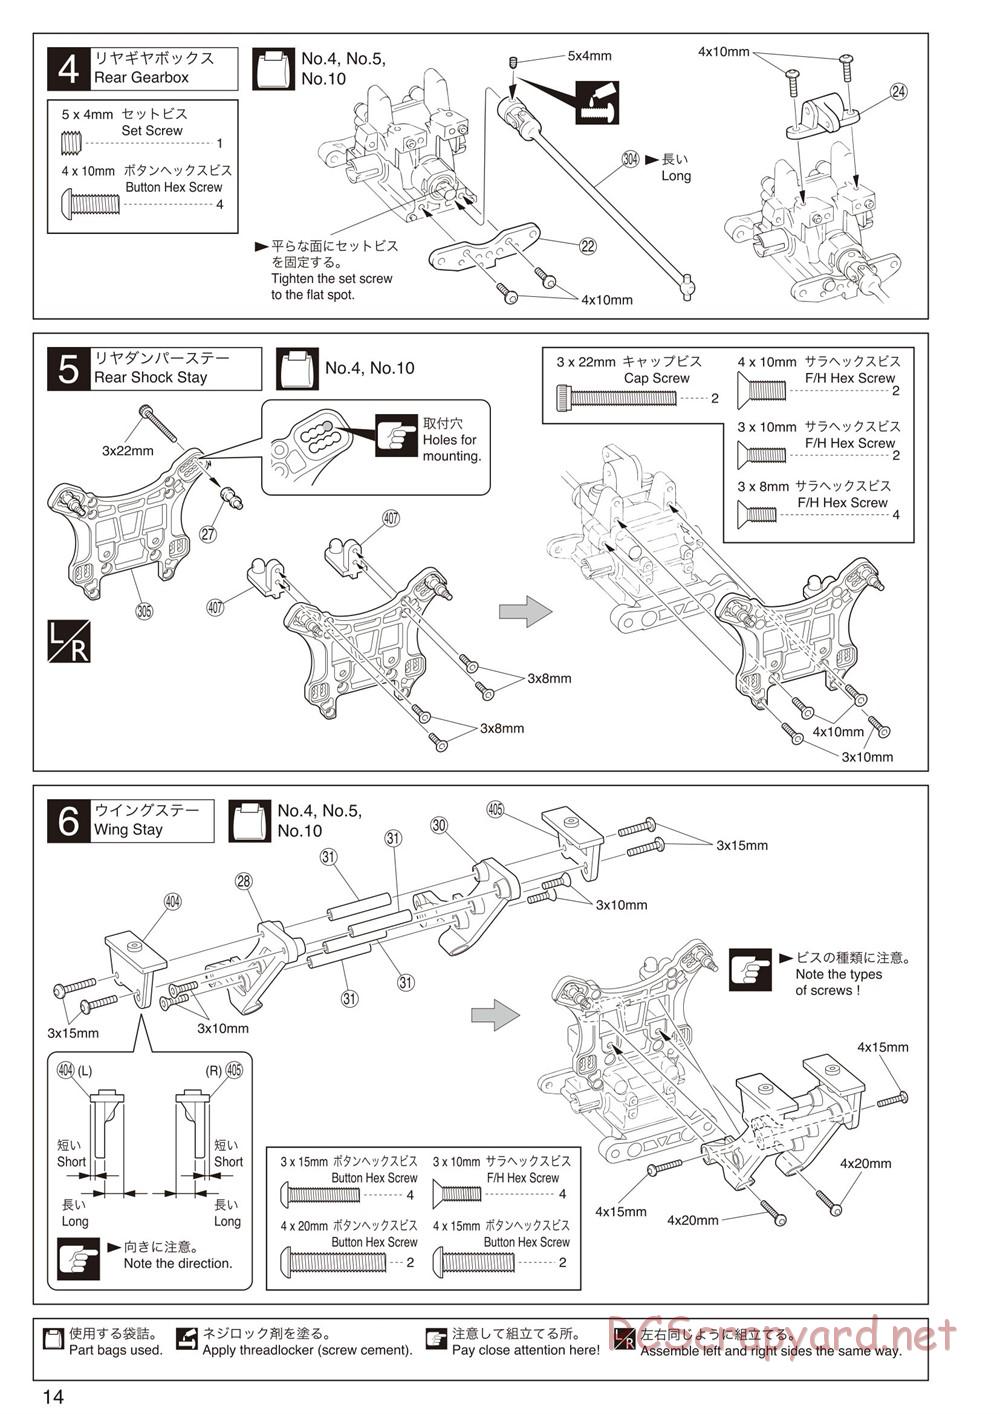 Kyosho - Inferno ST-RR Evo.2 - Manual - Page 18